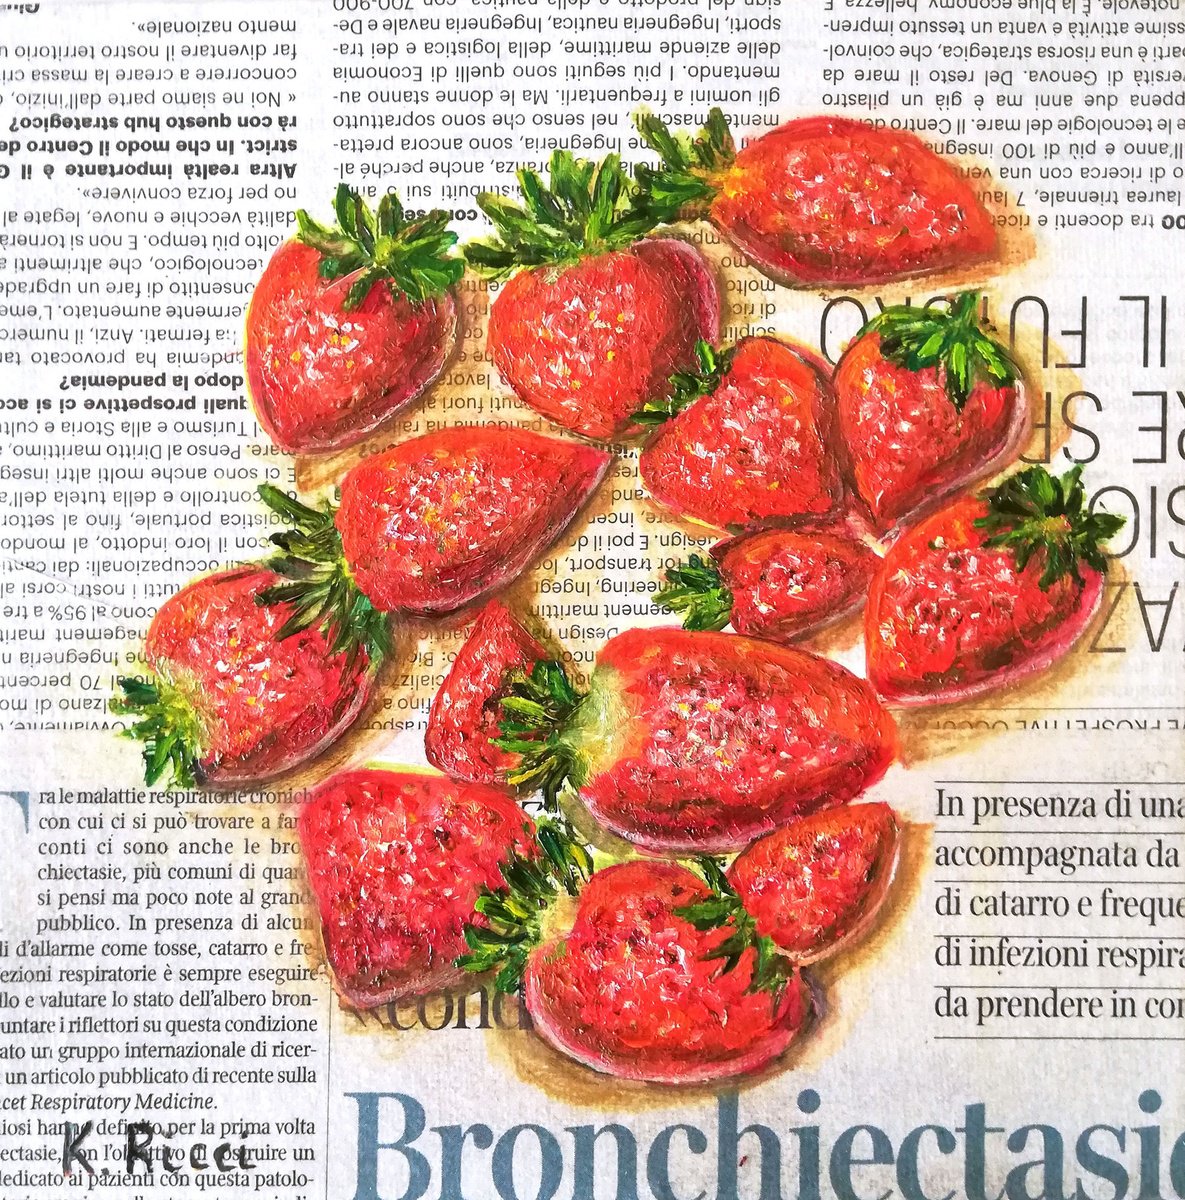 Strawberries on Newspaper Original Oil on Canvas Board Painting 8 by 8 inches (20x20 cm) by Katia Ricci